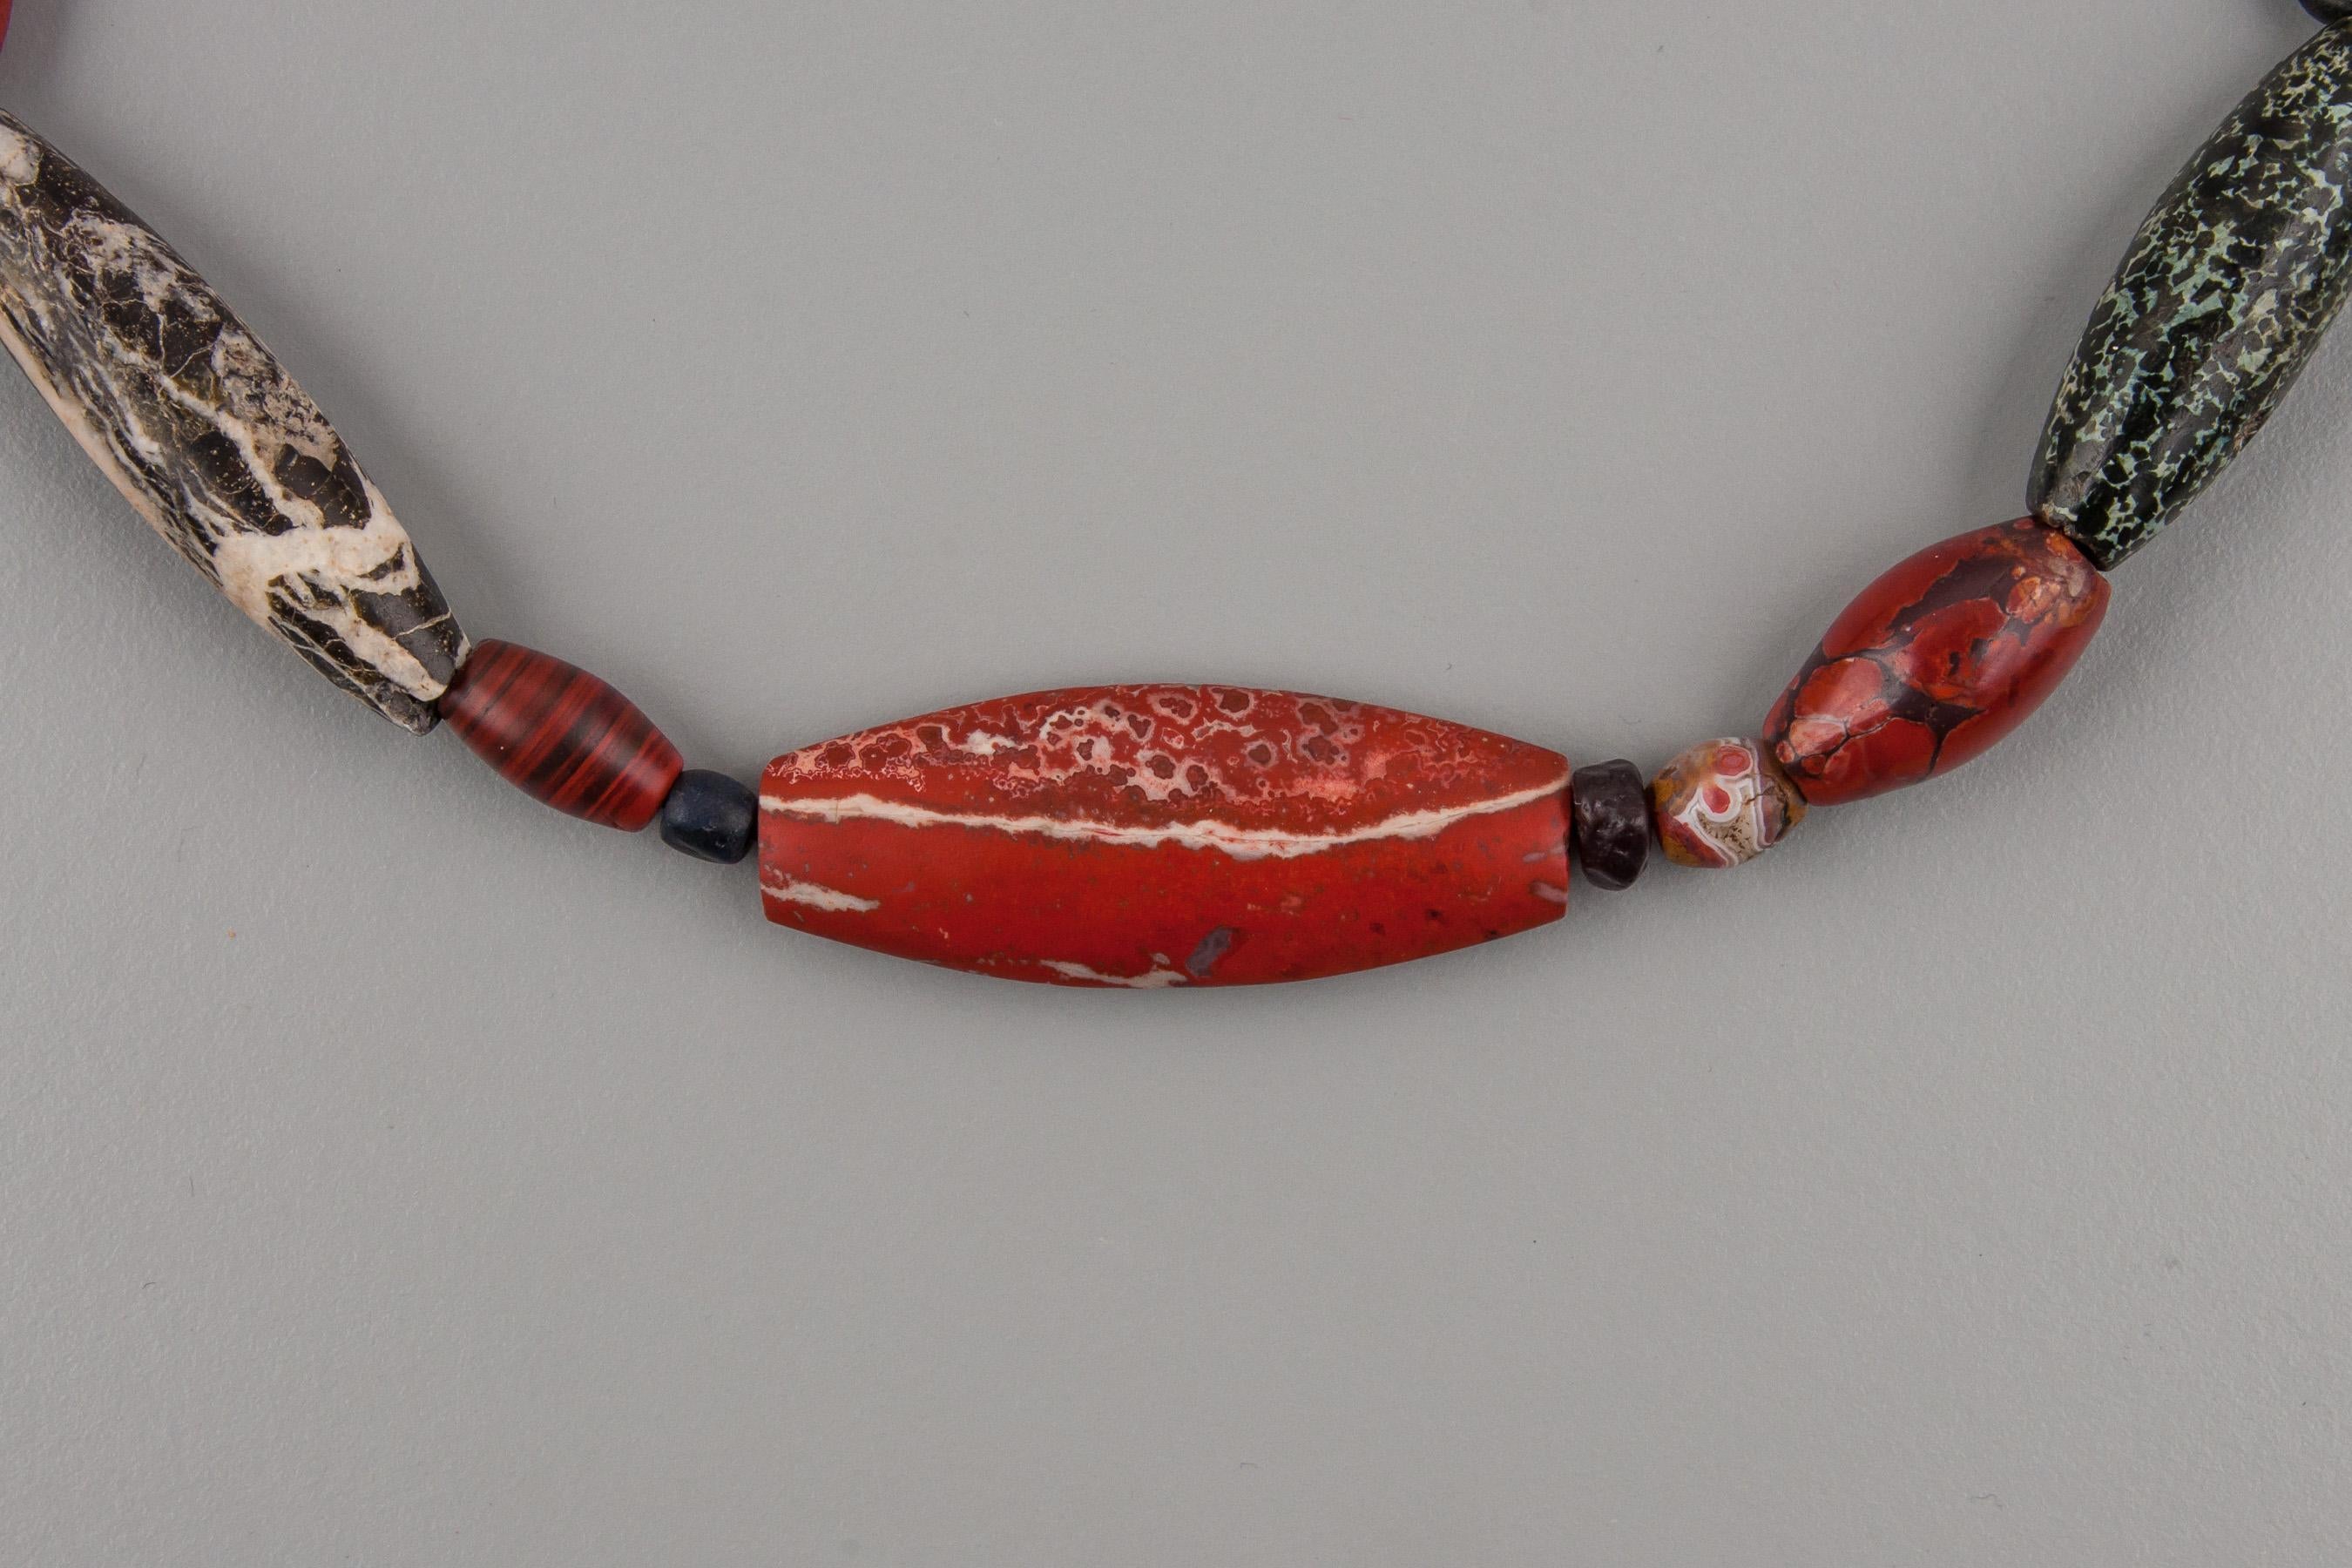 Twenty-eight ancient Bronze Age agate, jasper and alabaster beads. The beads have been selected to make a necklace with just the colors of red, black and white. The beads are from Baluchistan, Pakistan, and north India along the northwestern part